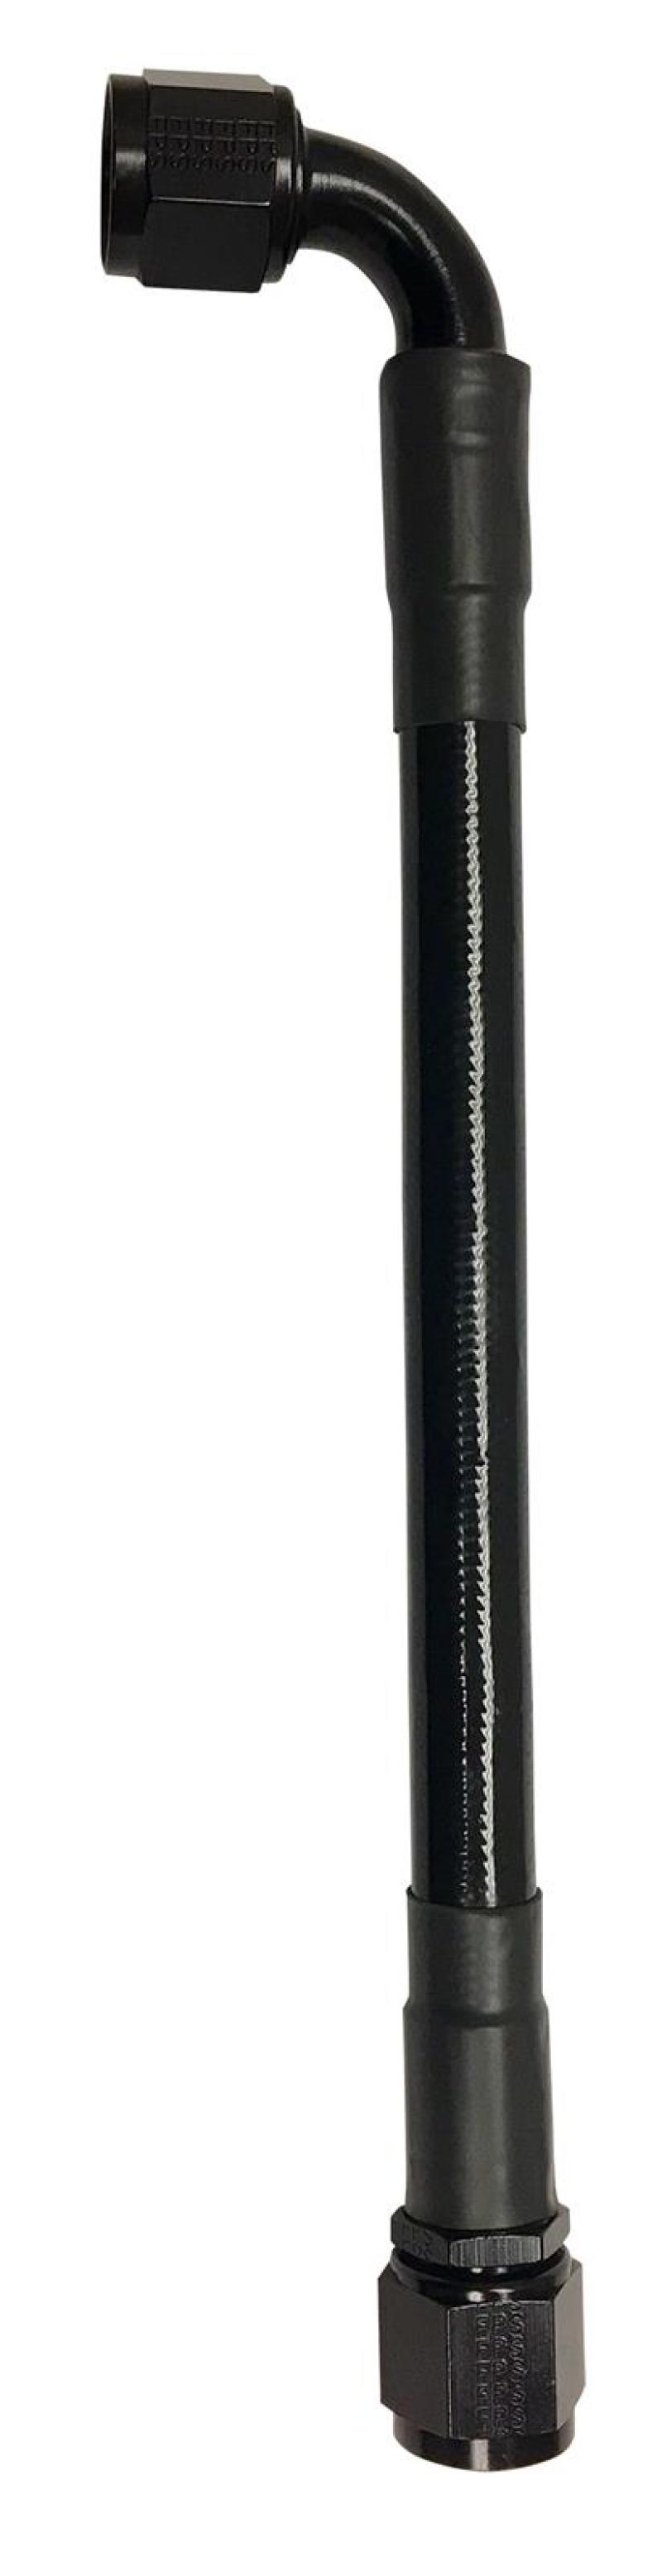 Fragola -10AN Ext Black PTFE Hose Assembly Straight x 90 Degree 60in - 6029-1-2-60BL